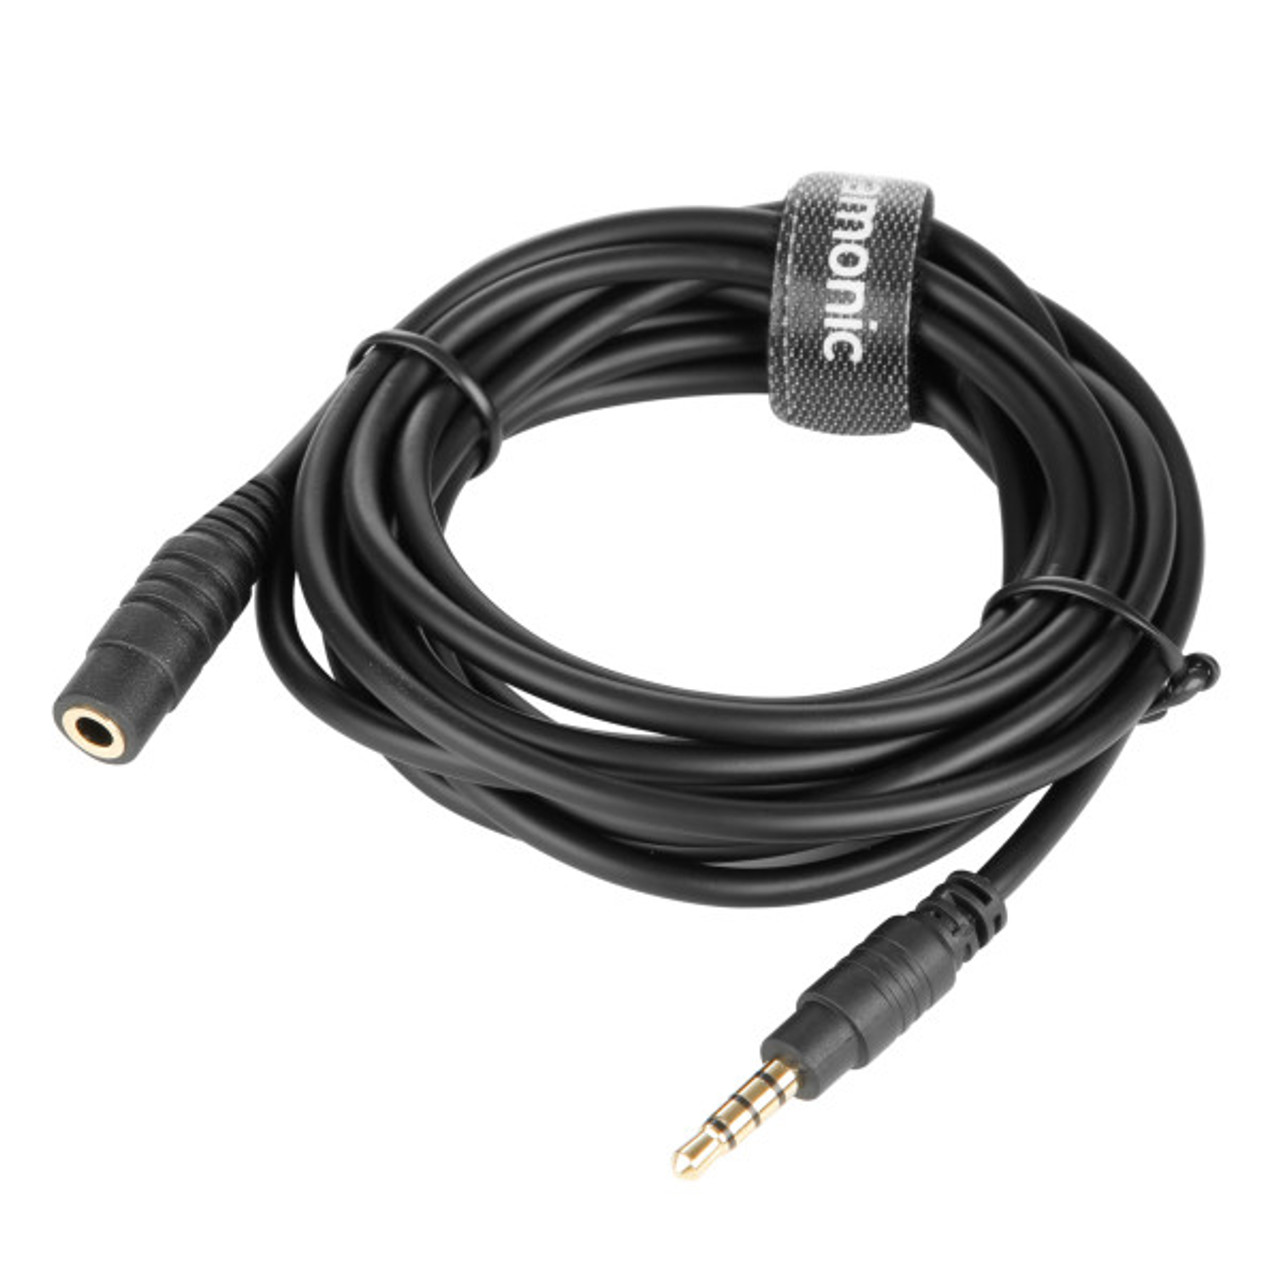 SARAMONIC SR-SC2500 3.5MM TRRS EXTENSION CABLE (8.2 FT)